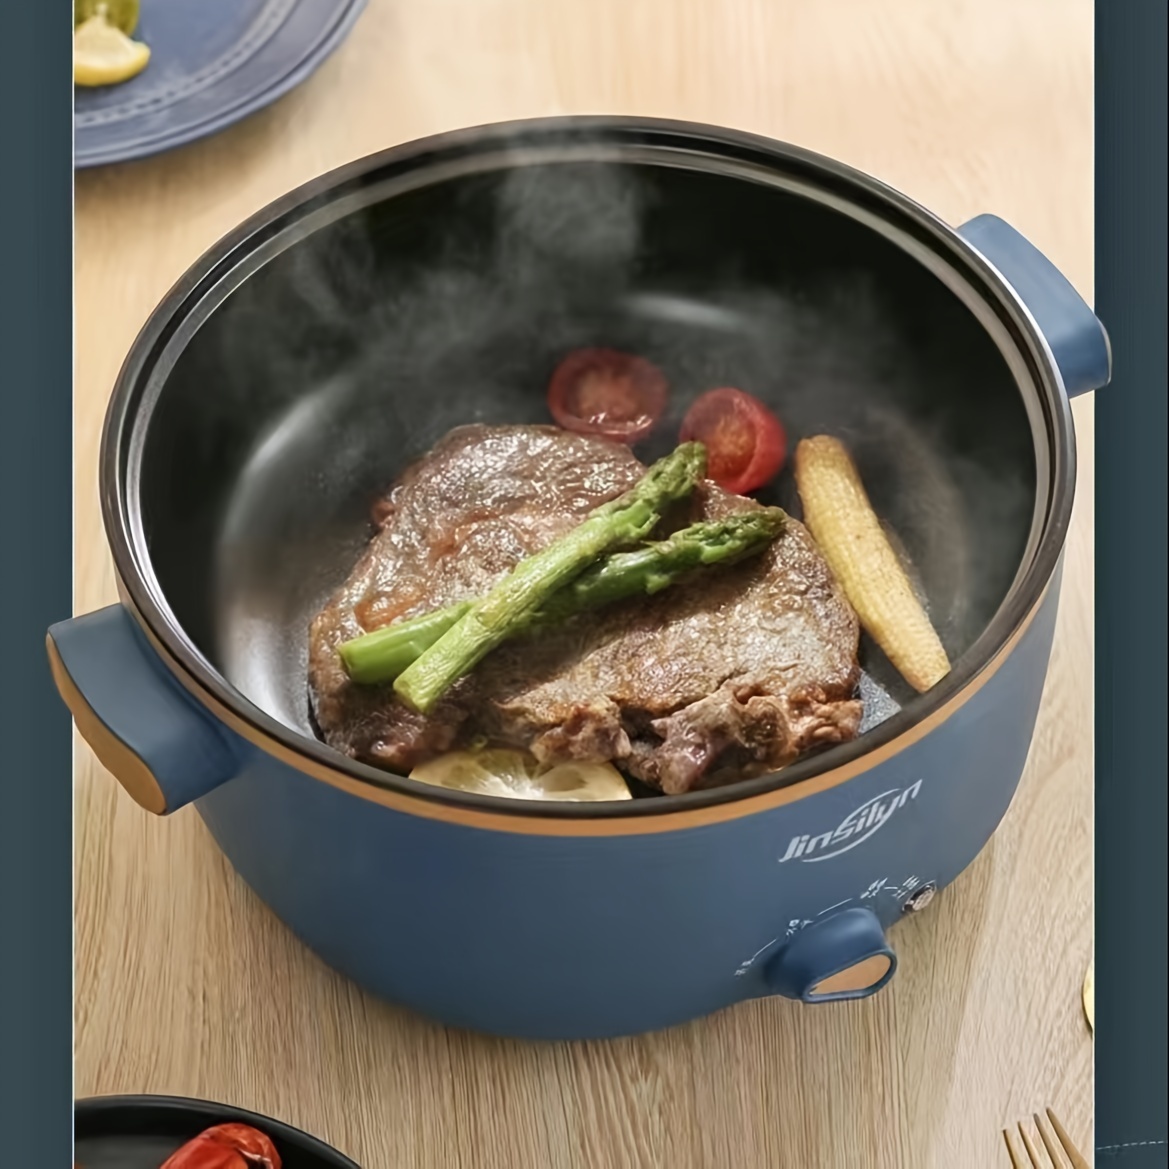 Household Multi-function Electric Frying Pan Integrated Non Stick Frying  Pan Large Capacity Electric Hot Pot Electric Cooking